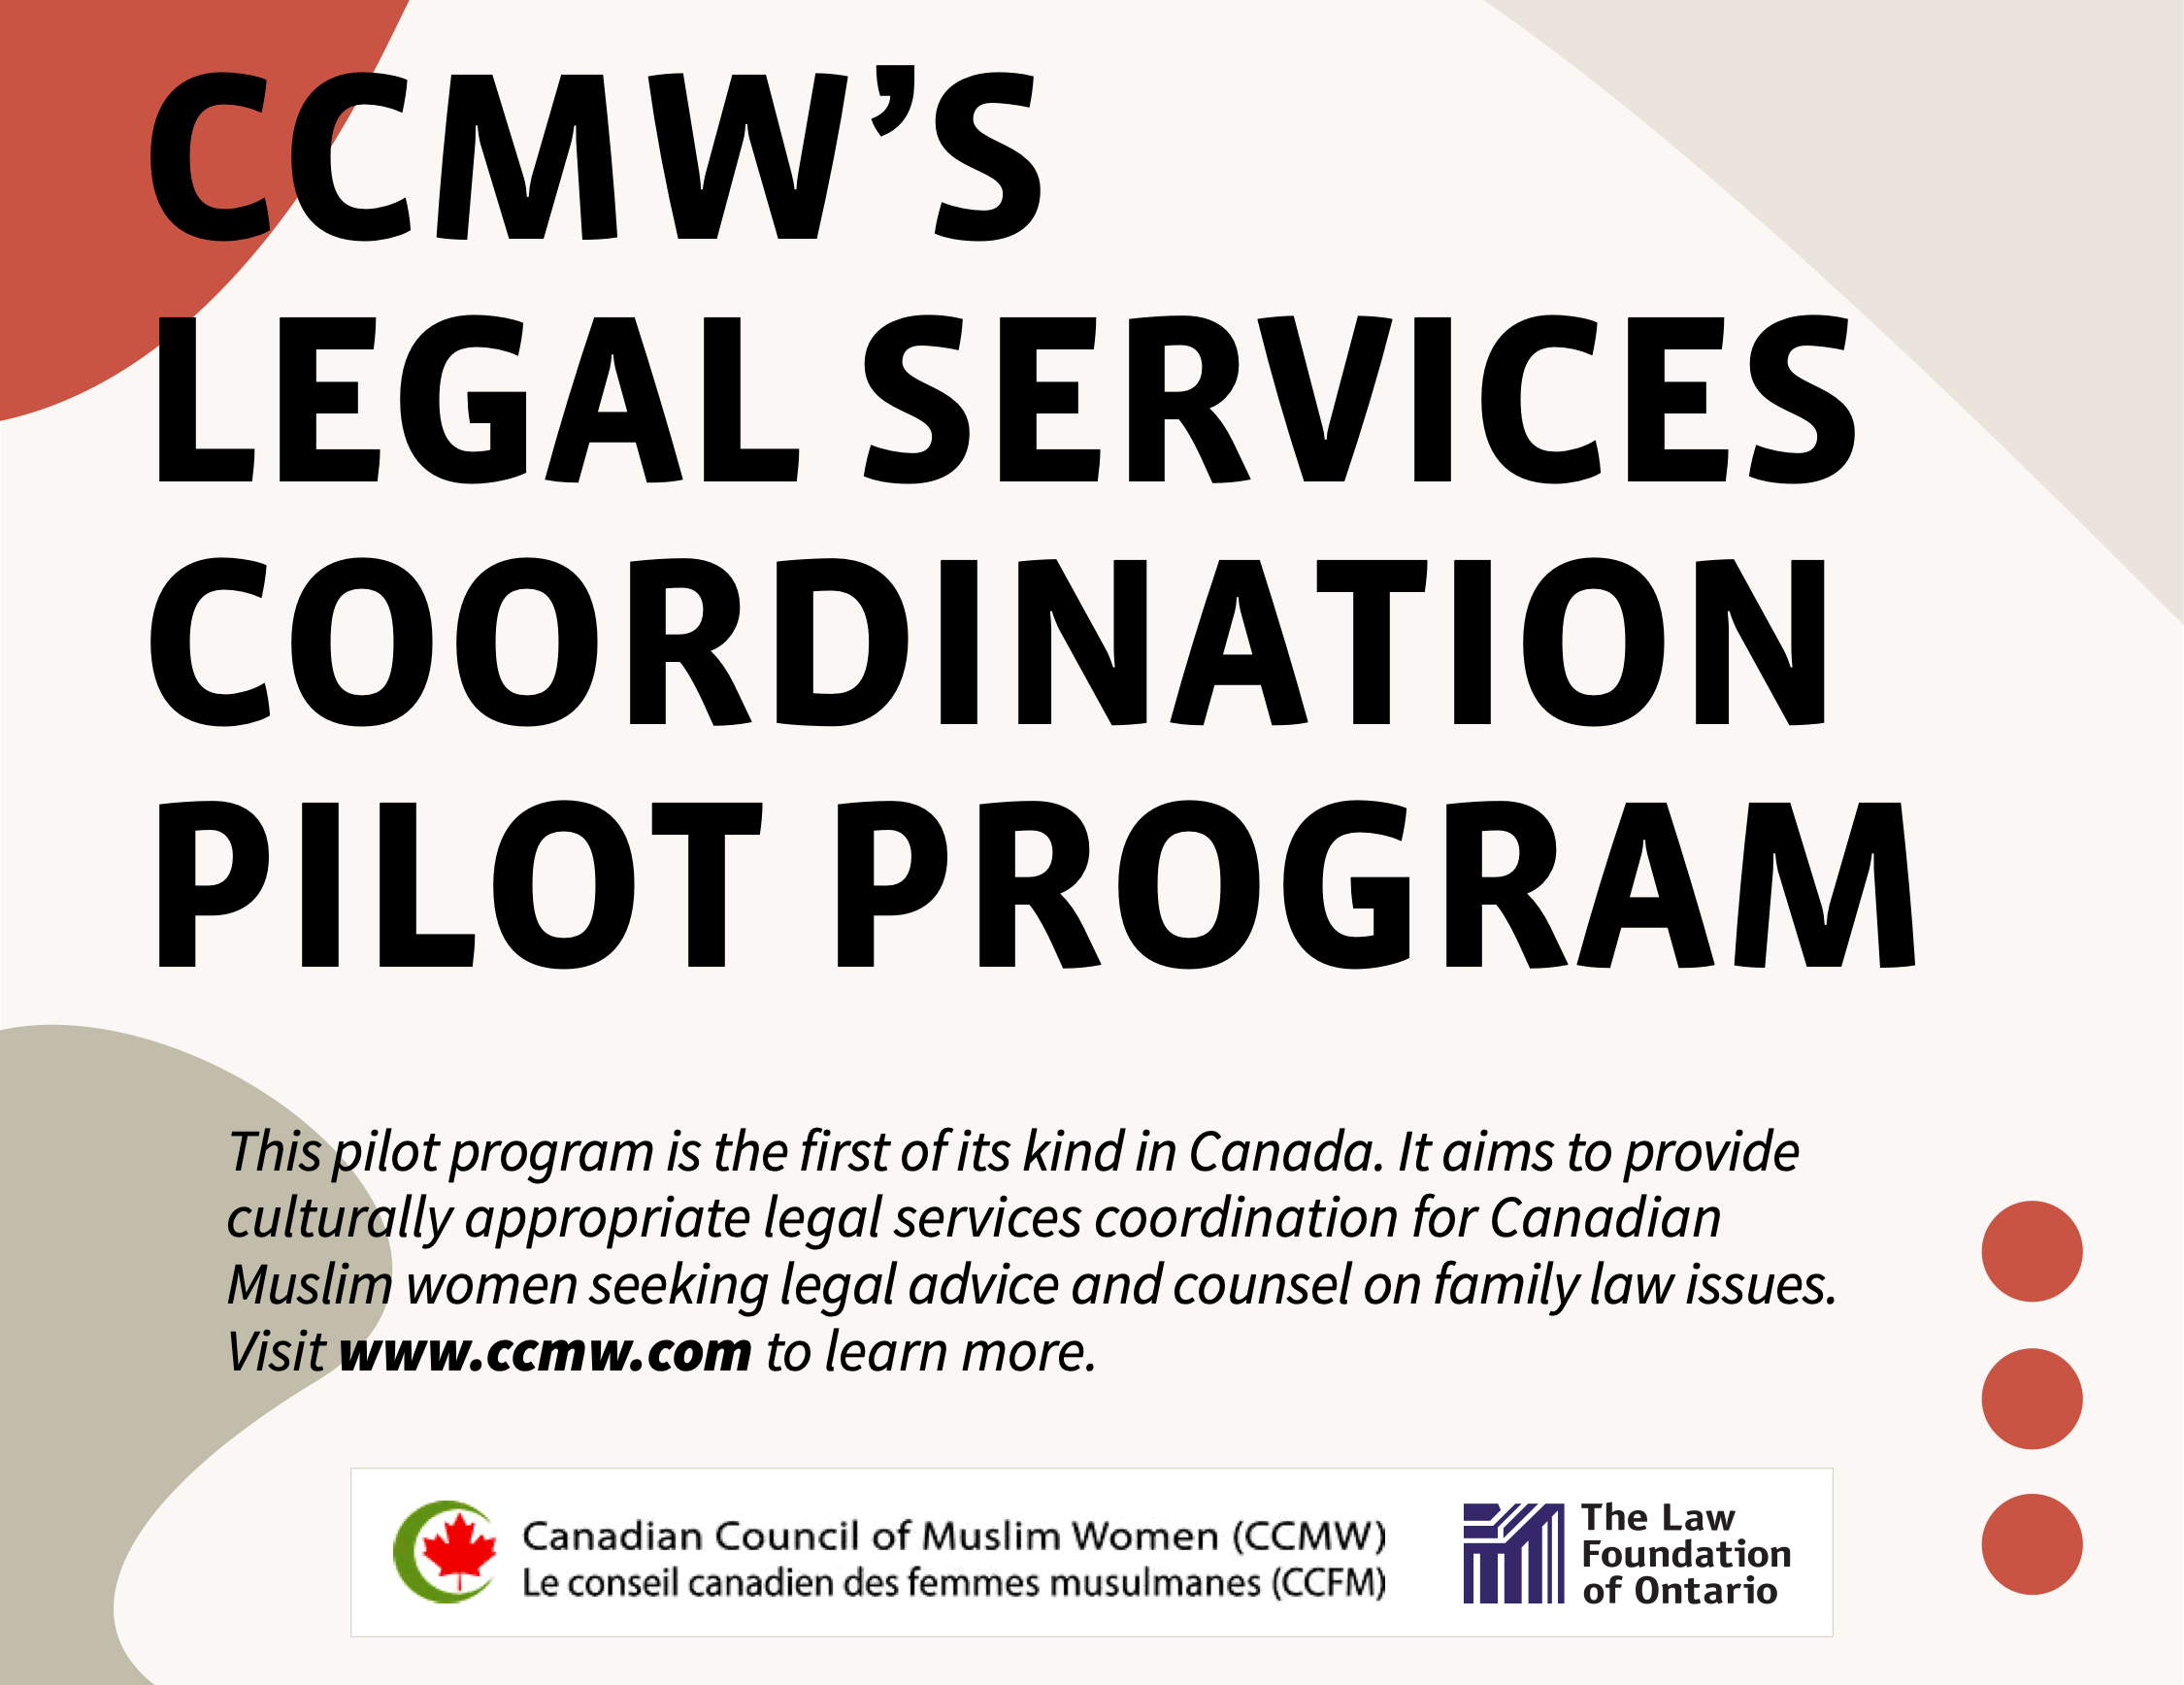 Guest blog post on CCMW’s Legal Services Project